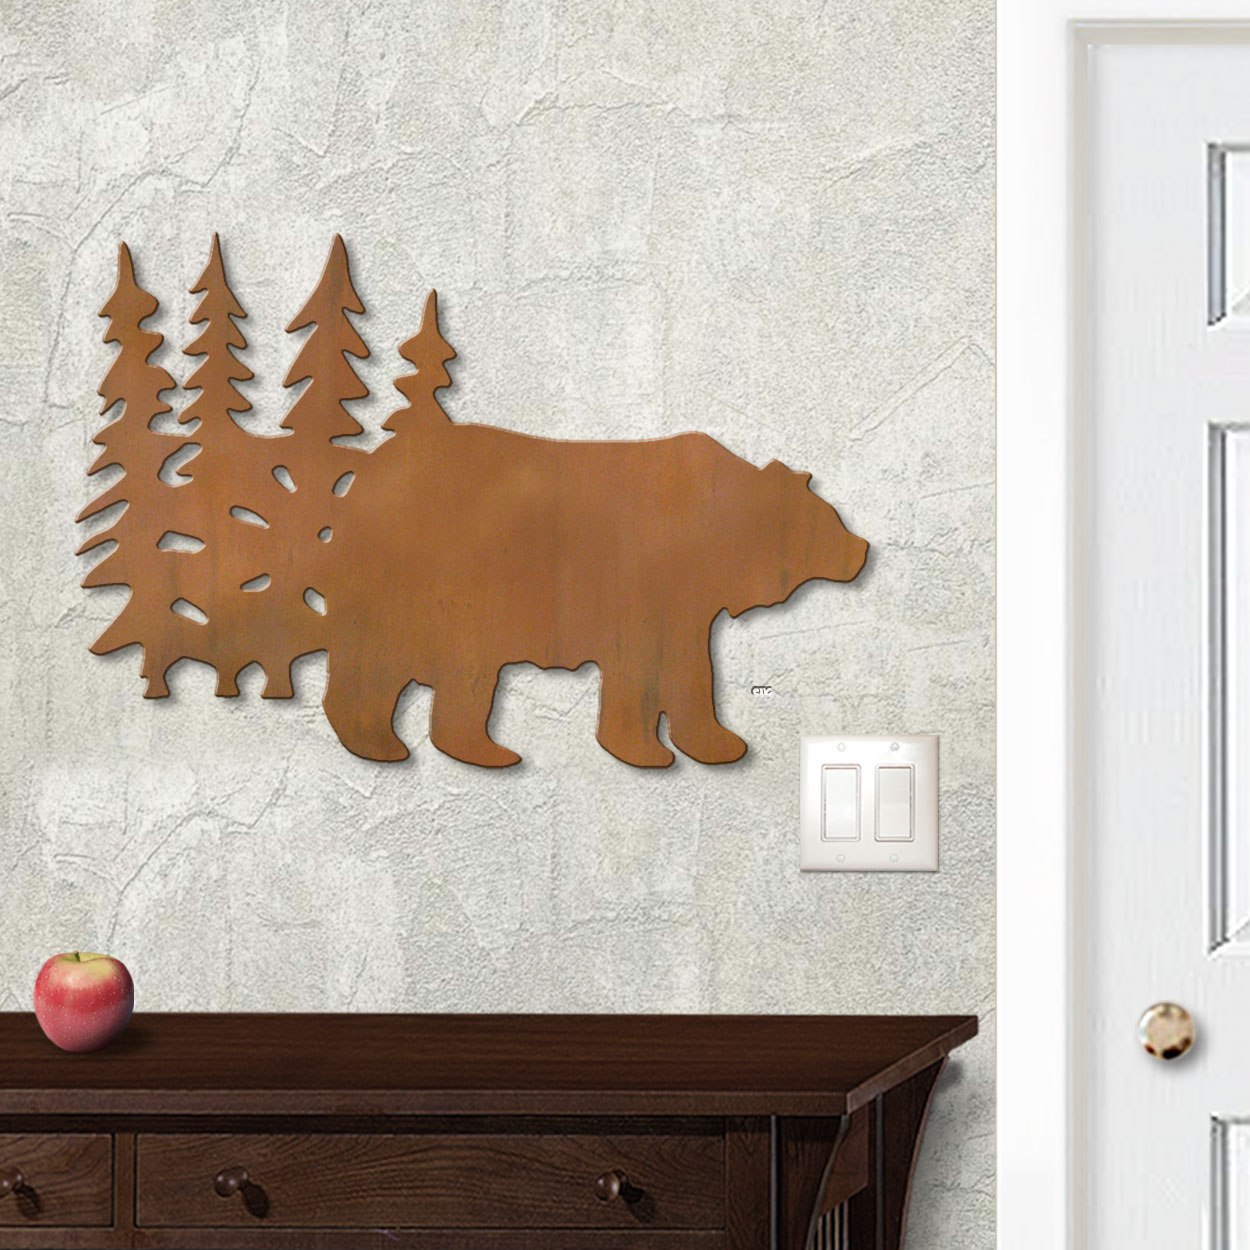 625004r - 18in or 24in Floating Metal Wall Art - Bear And Trees - Rust Patina